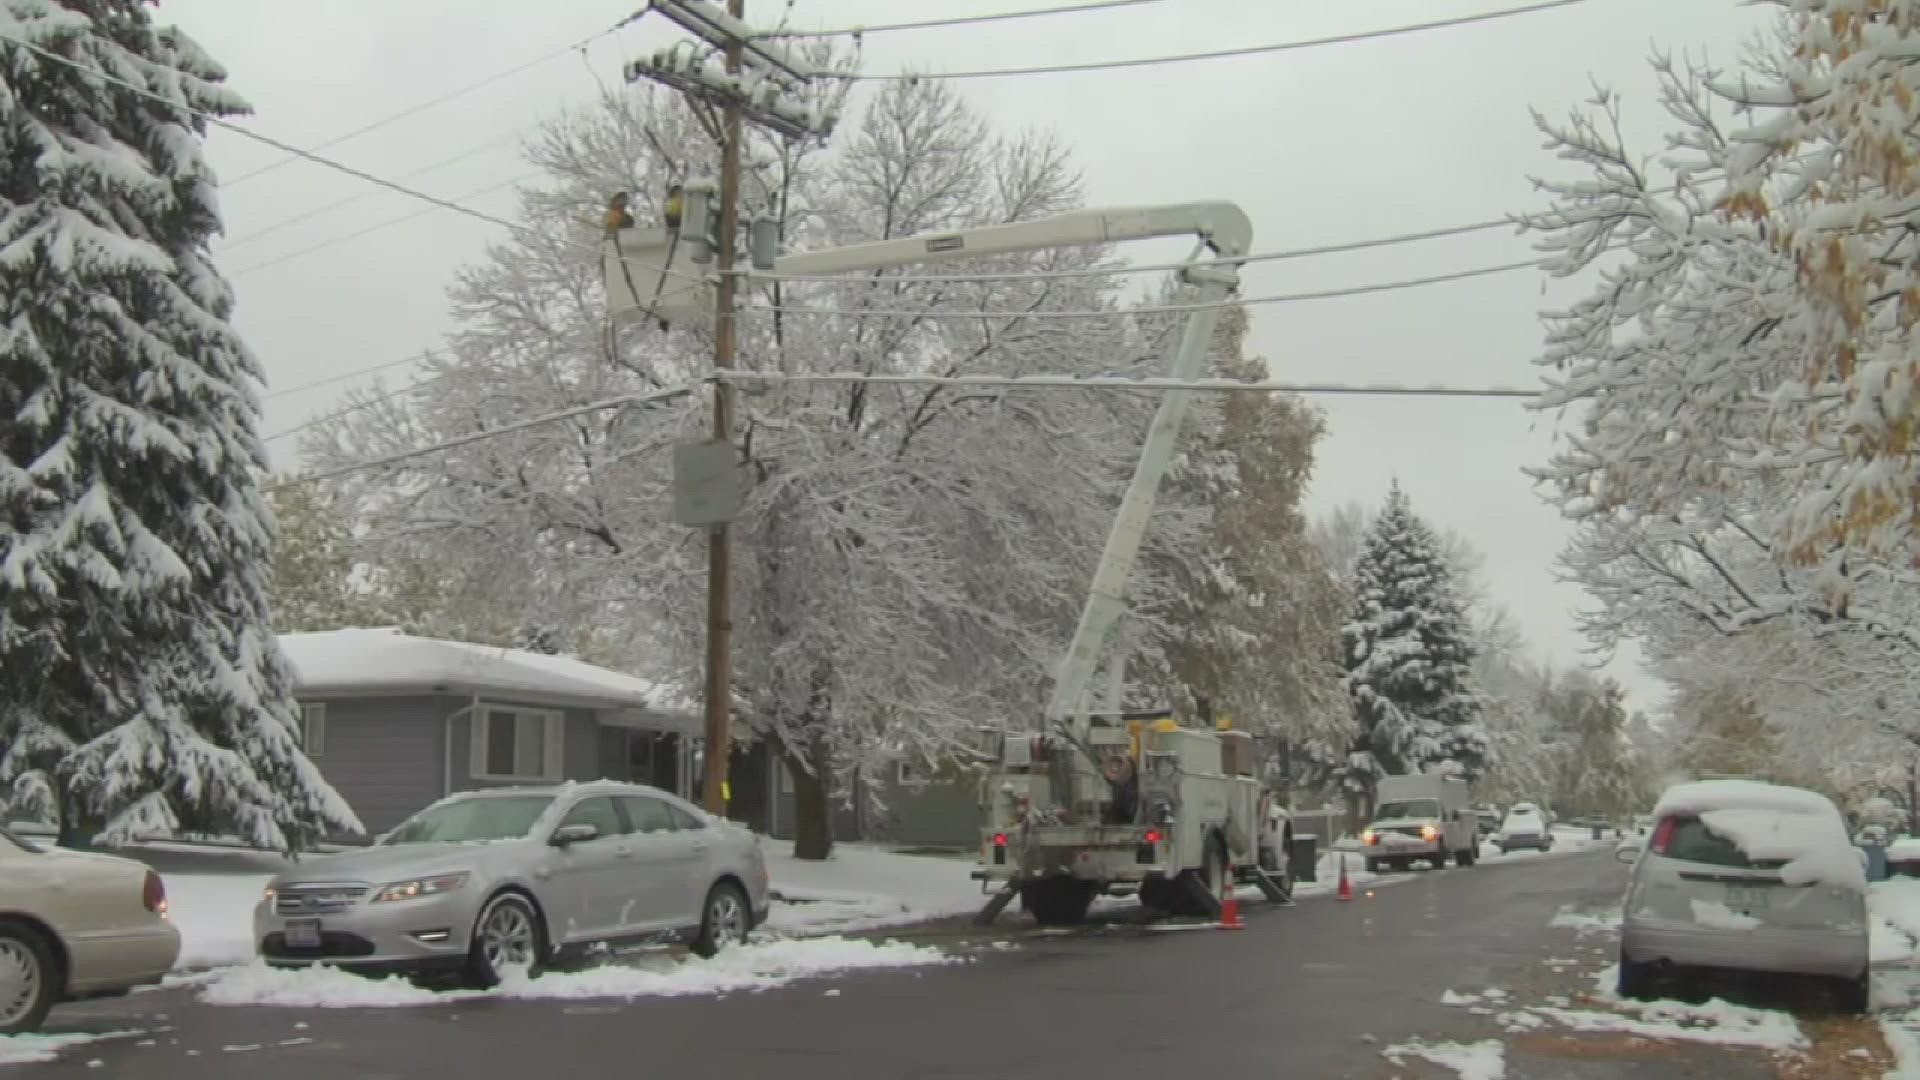 Power companies are worried about outages with the combination of heavy snow and damaged tree limbs. Meteorologist Cory Reppenhagen shows us how they're preparing.